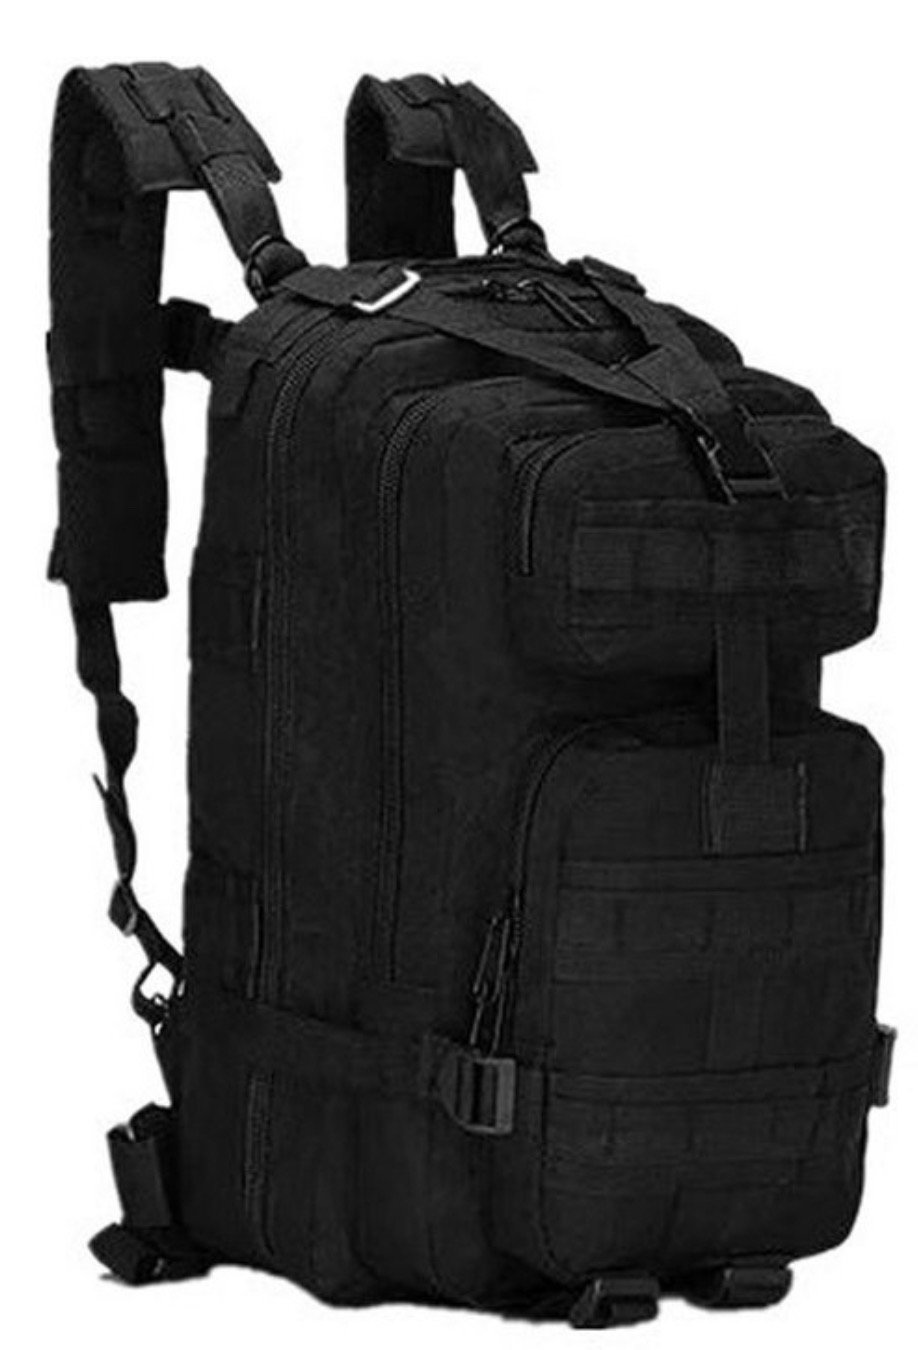 MILITARY CANVAS COMBAT - BACKPACK | Merch By Tha Pound